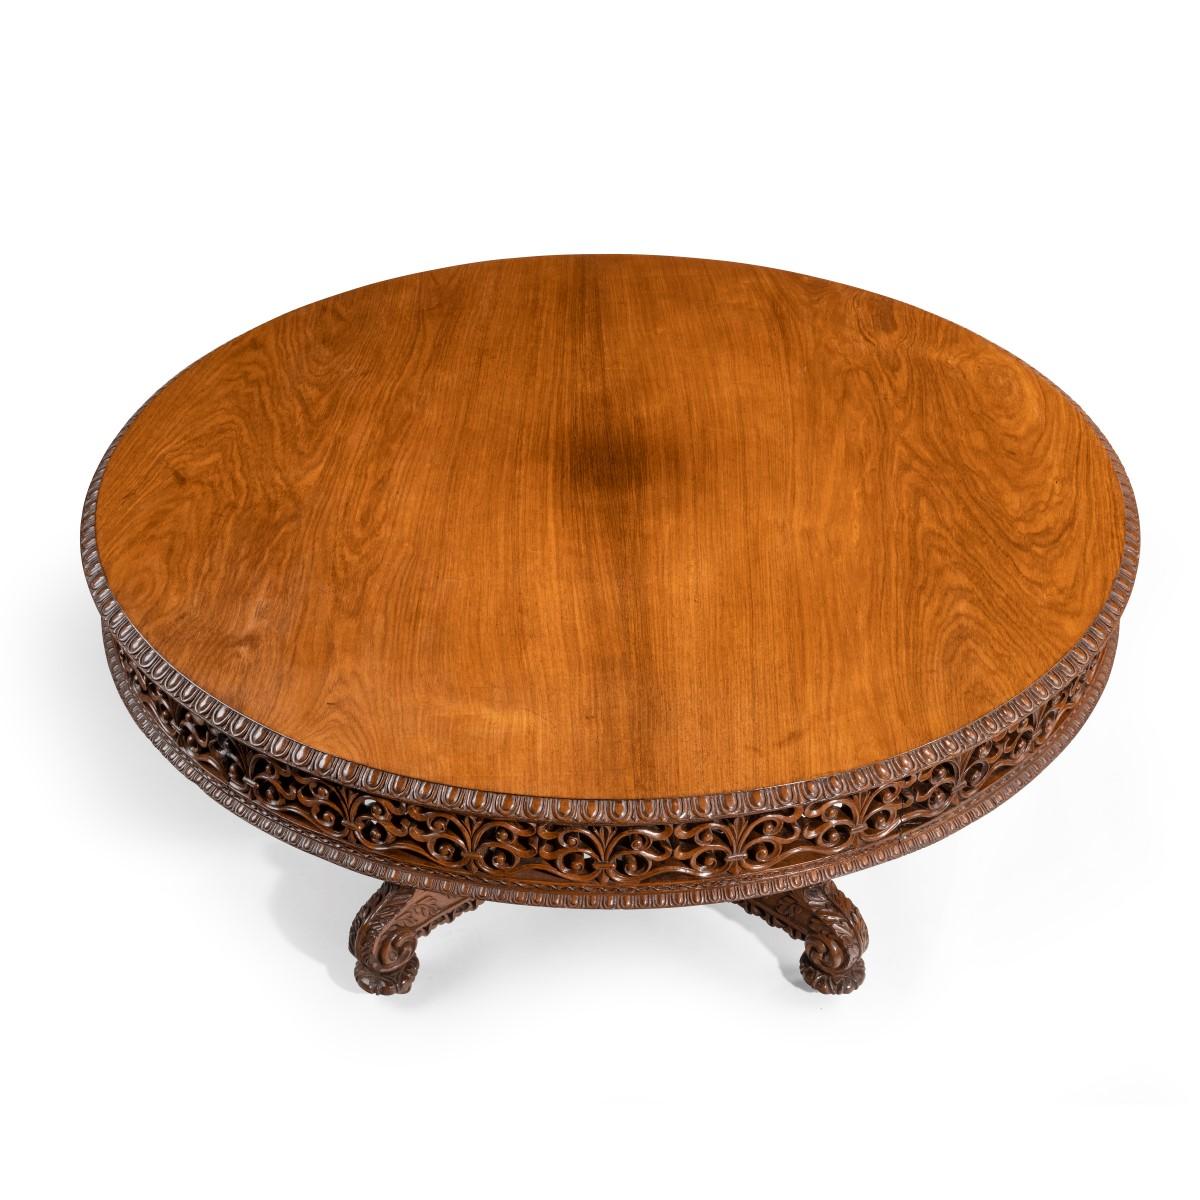 A William IV Colonial padouk five-foot round table